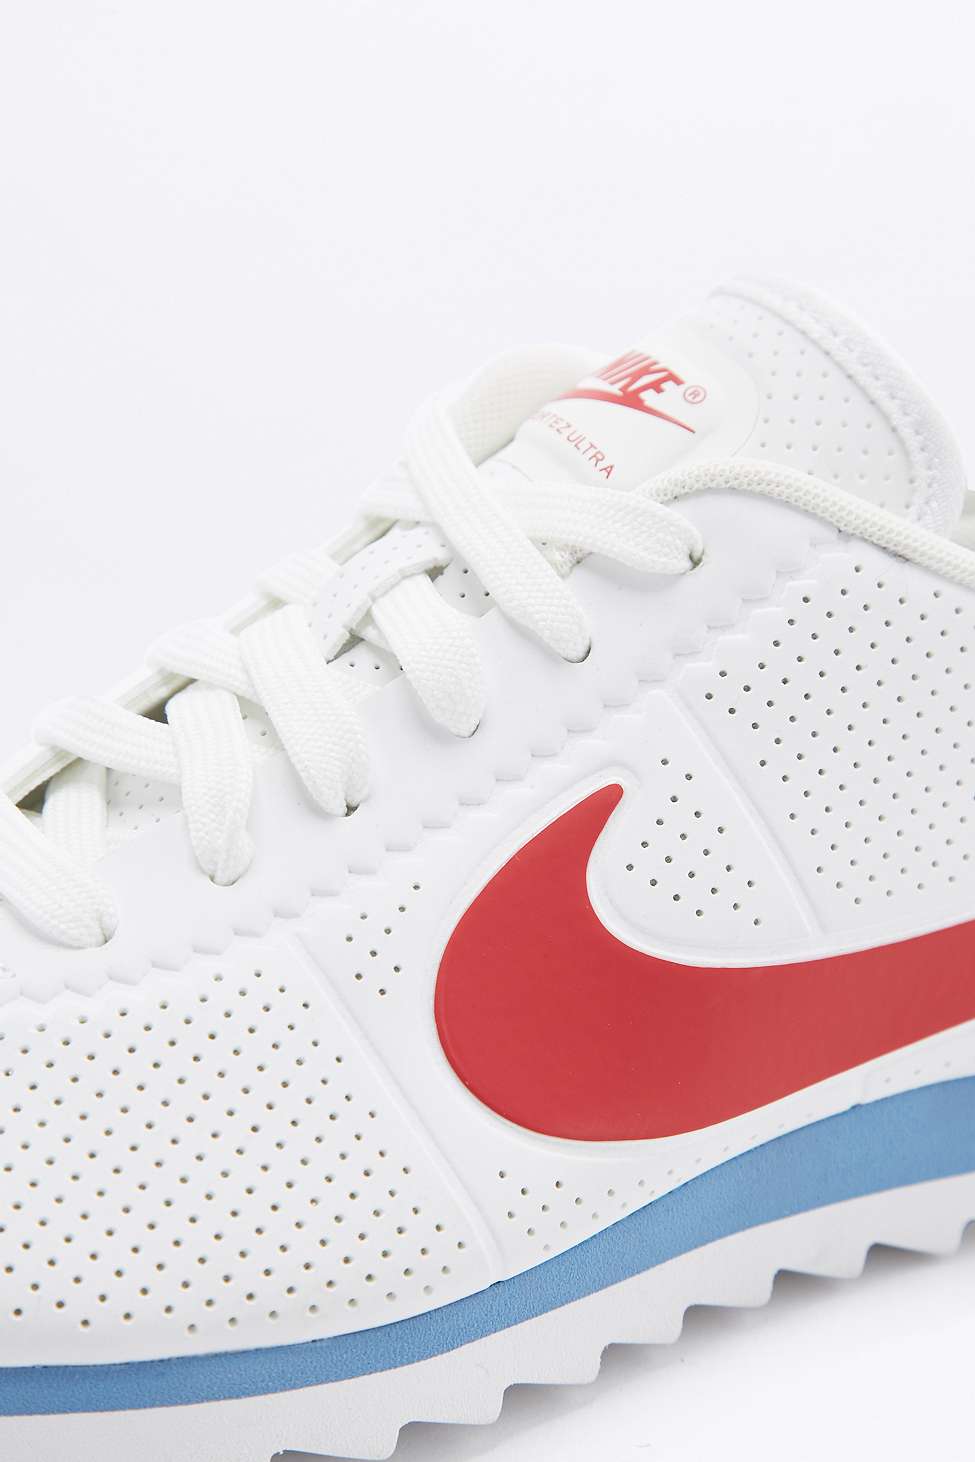 Nike Cortez Ultra Moire Red, White, and 